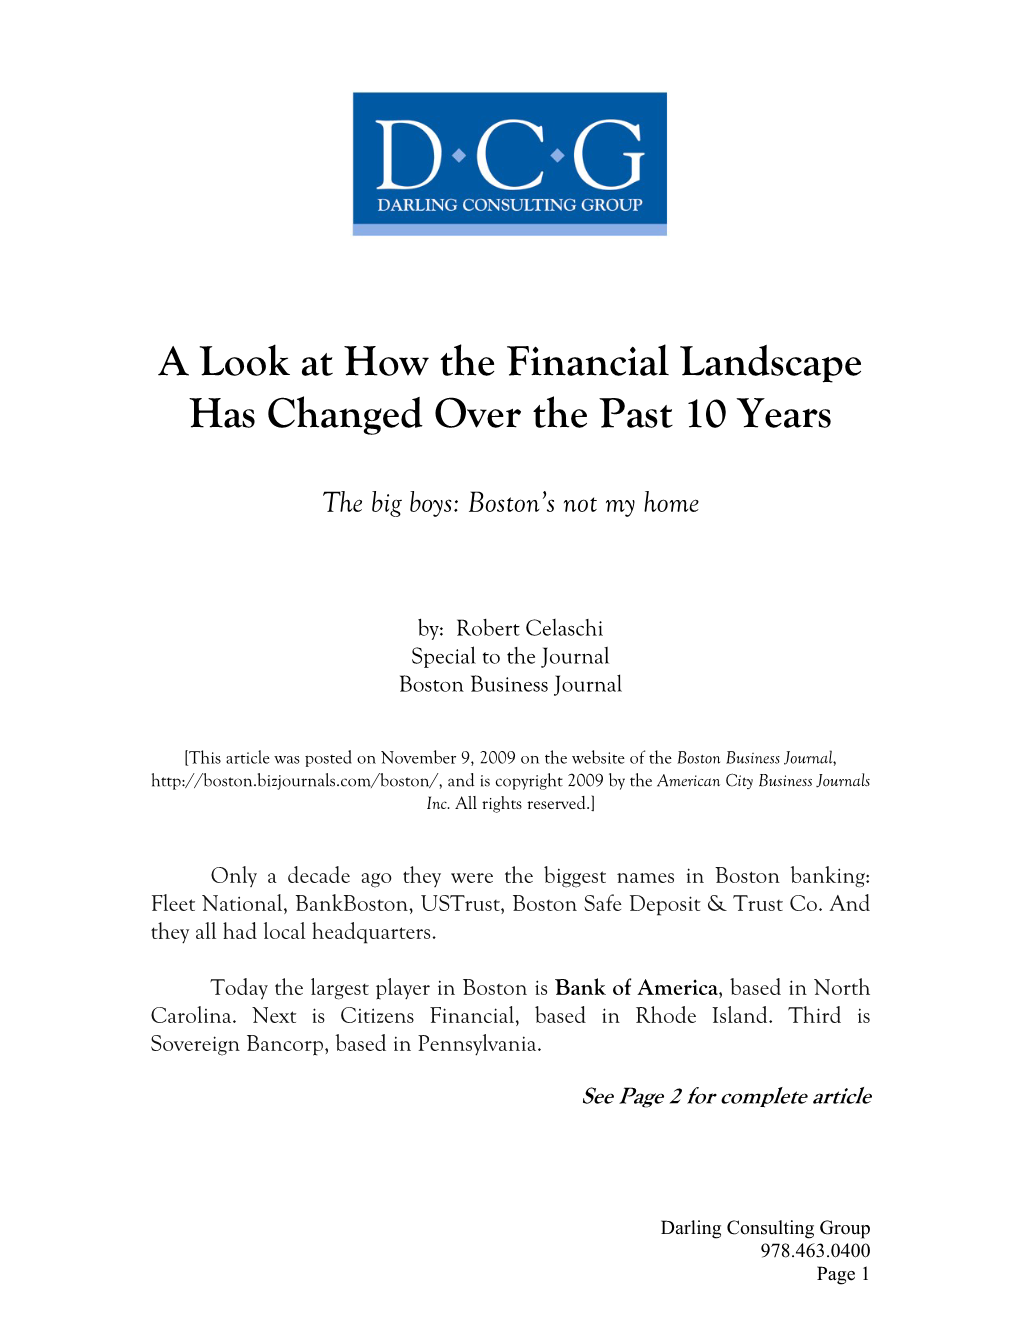 A Look at How the Financial Landscape Has Changed Over the Past 10 Years